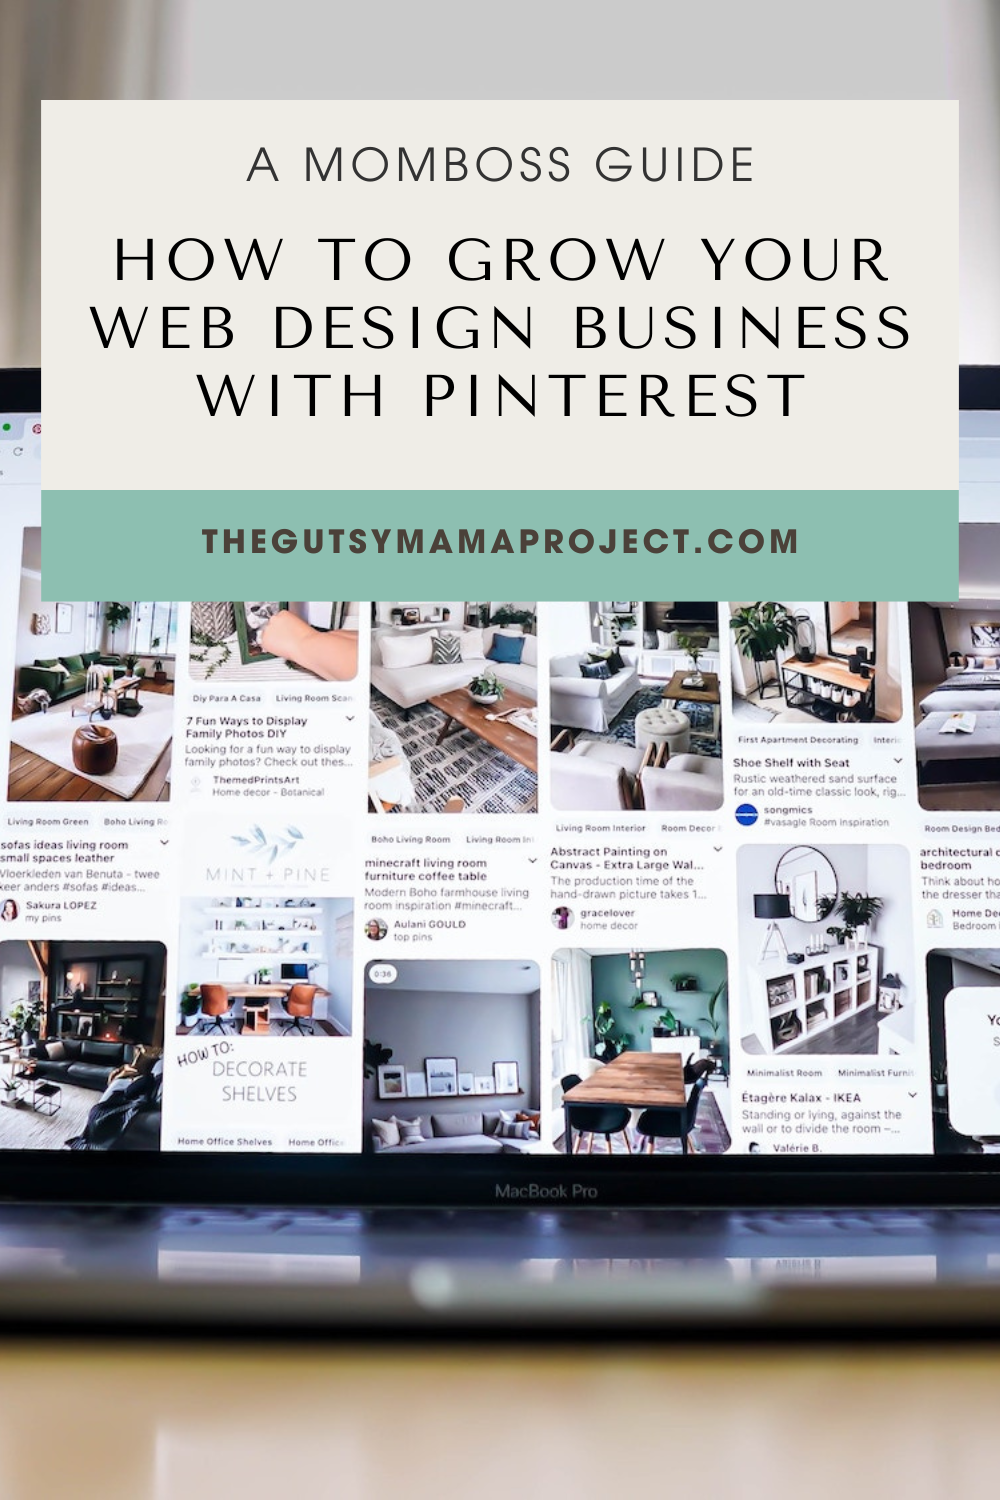 How to Grow Your Web Design Business with Pinterest - thegutsymamaproject.com (1).png